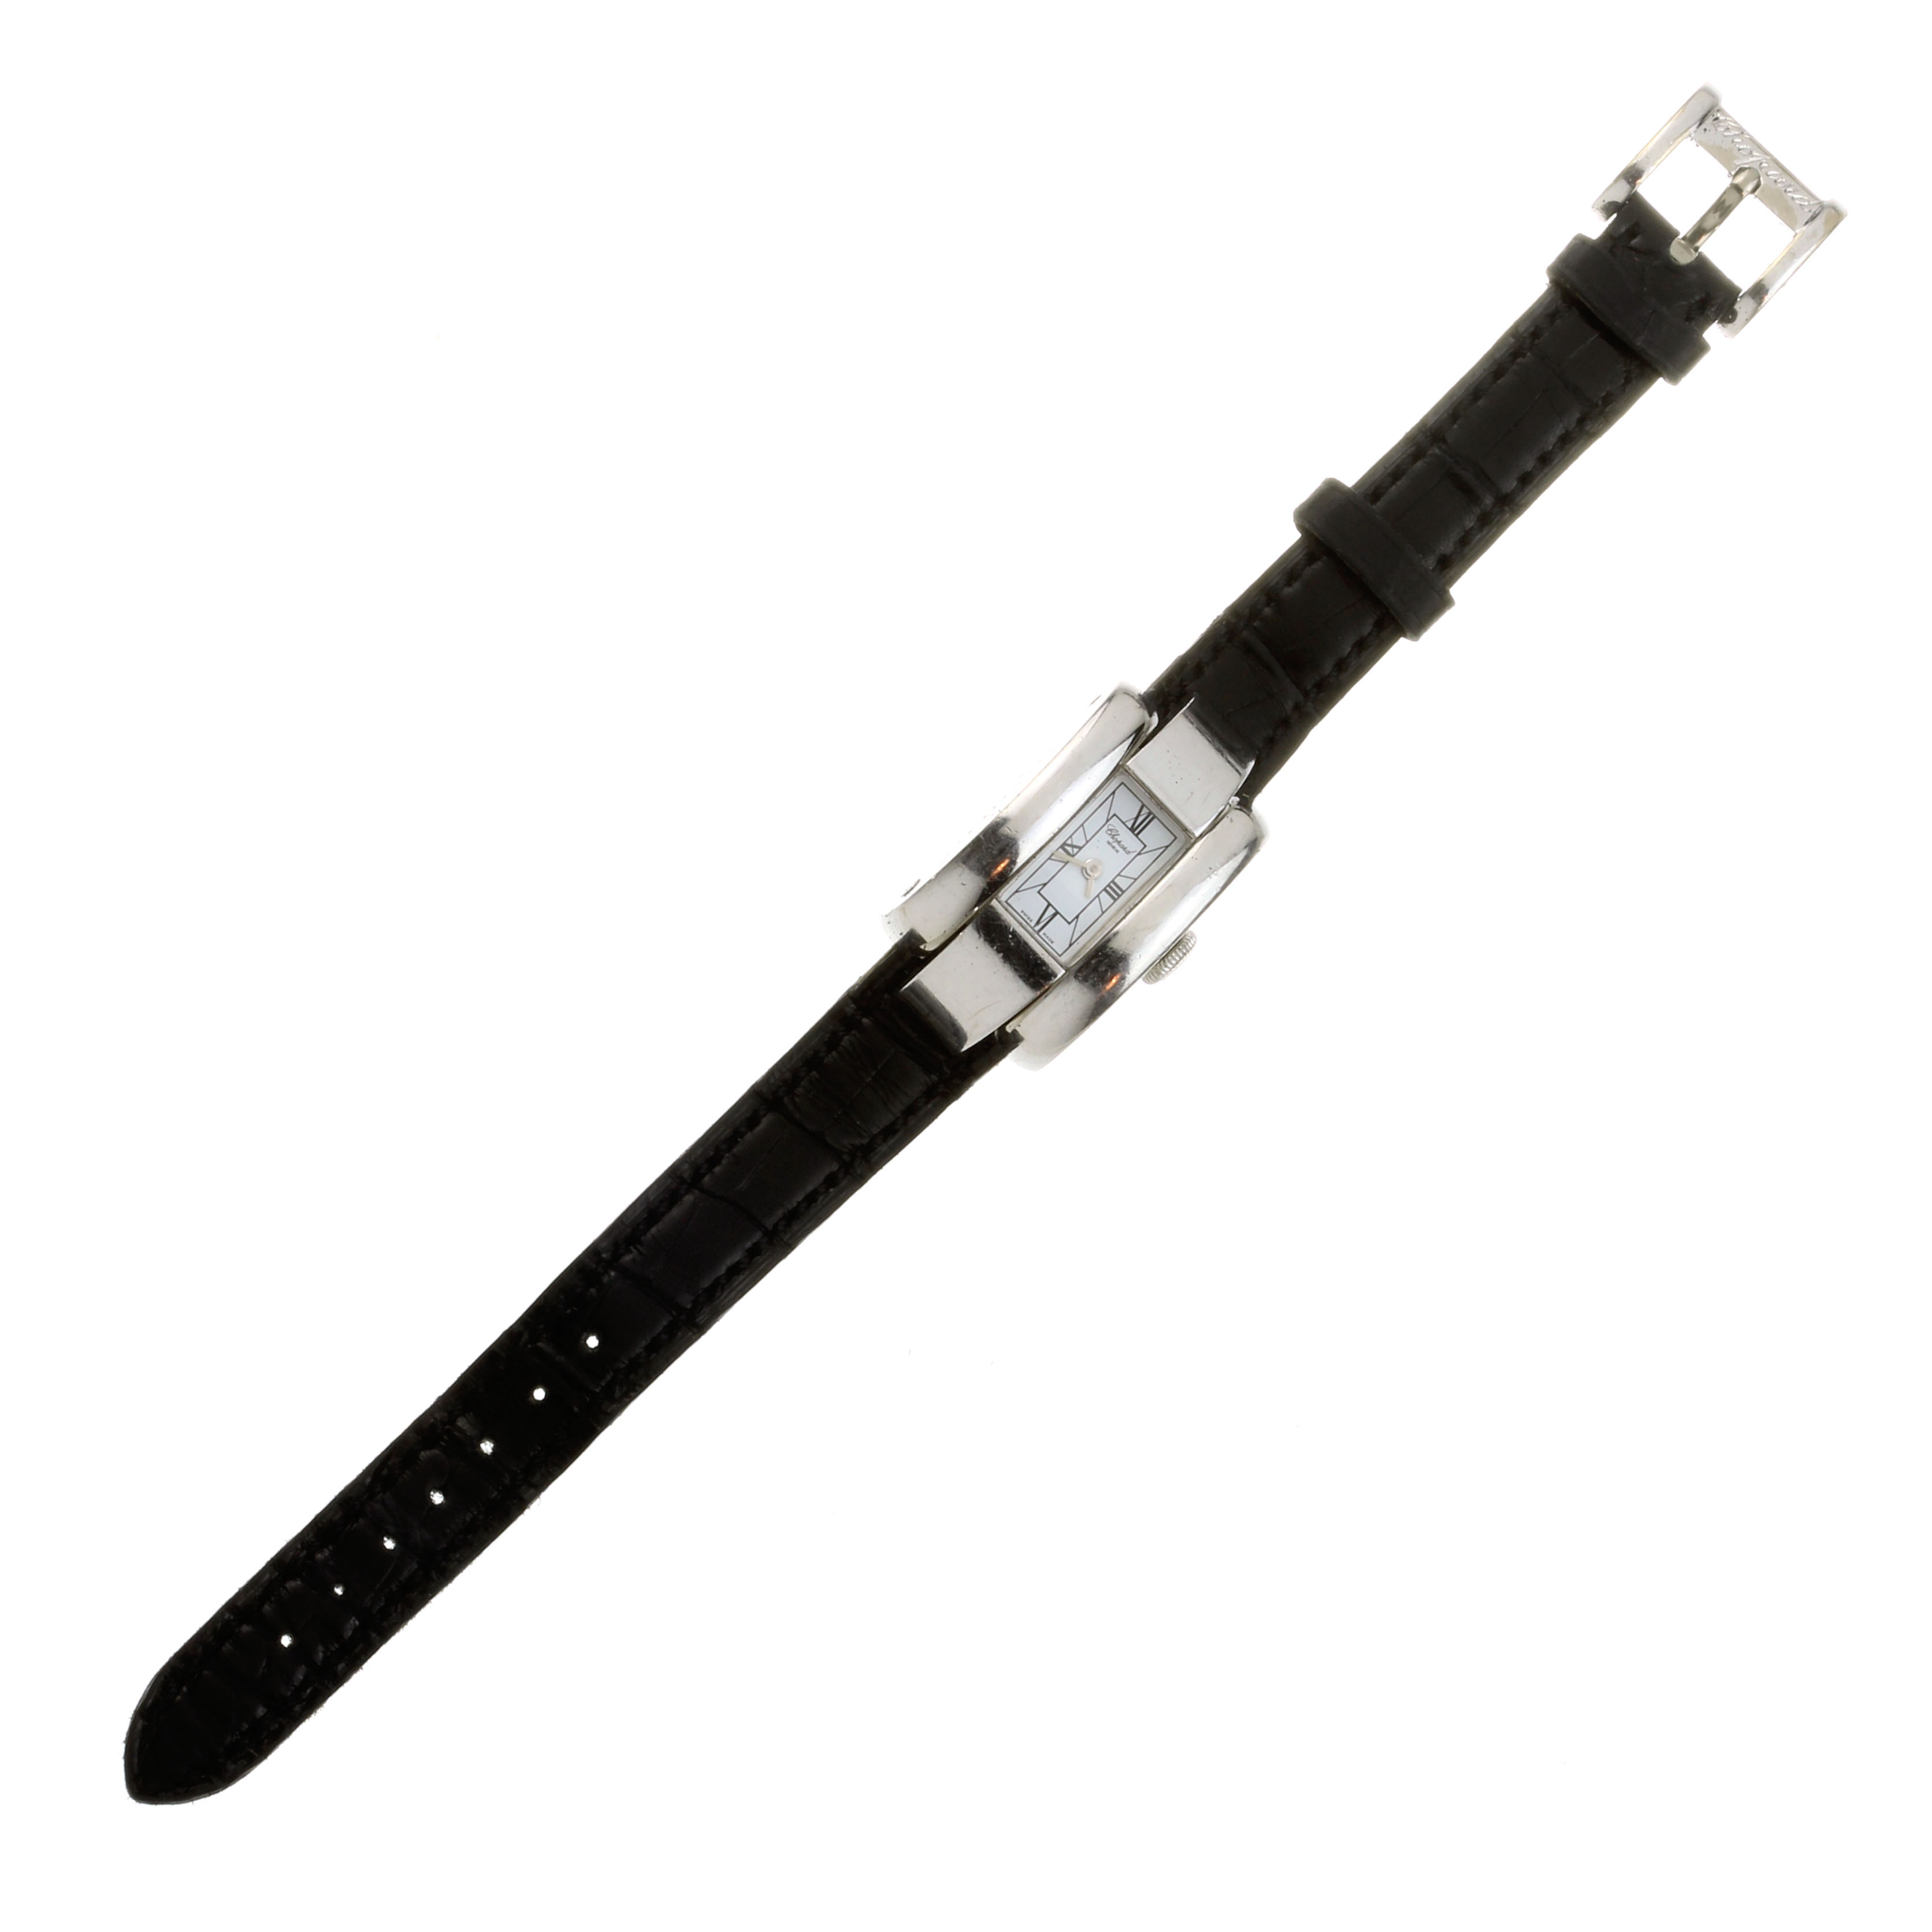 A LADIES LA STRADA WRIST WATCH, CHOPARD in 18ct white gold, with Chopard leather strap, original - Image 2 of 2